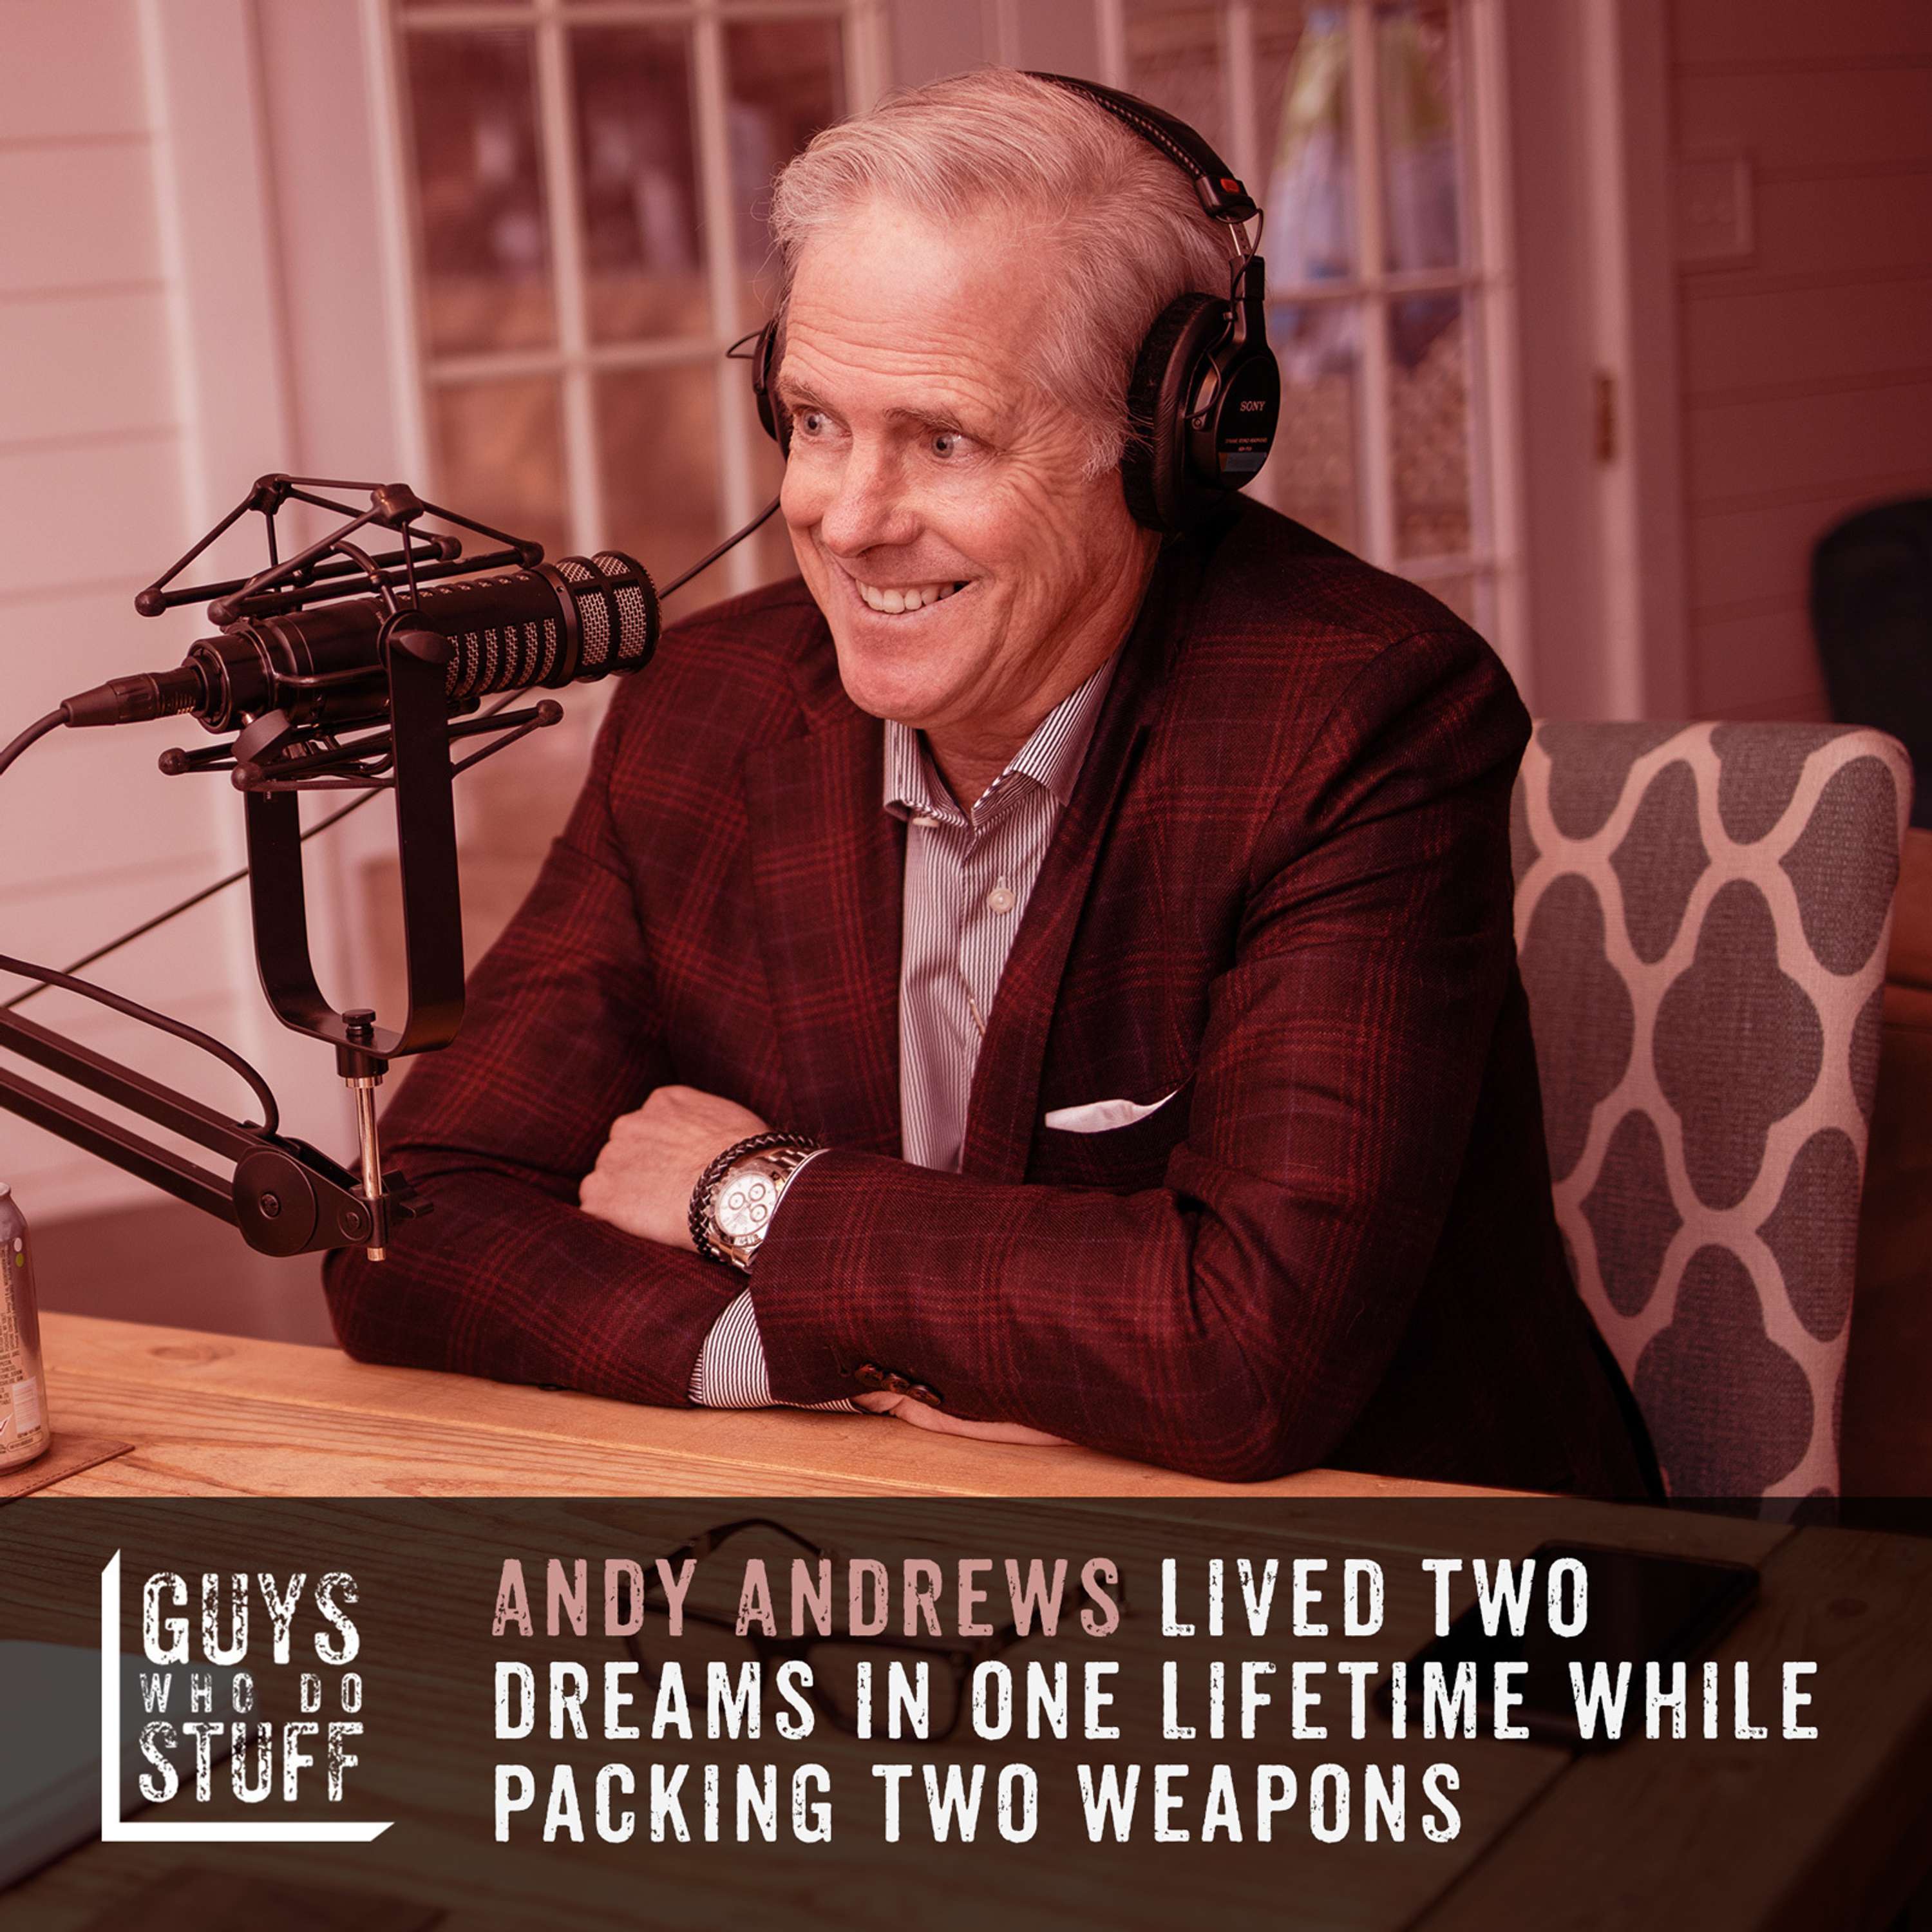 Andy Andrews lived two dreams in one lifetime while packing two weapons